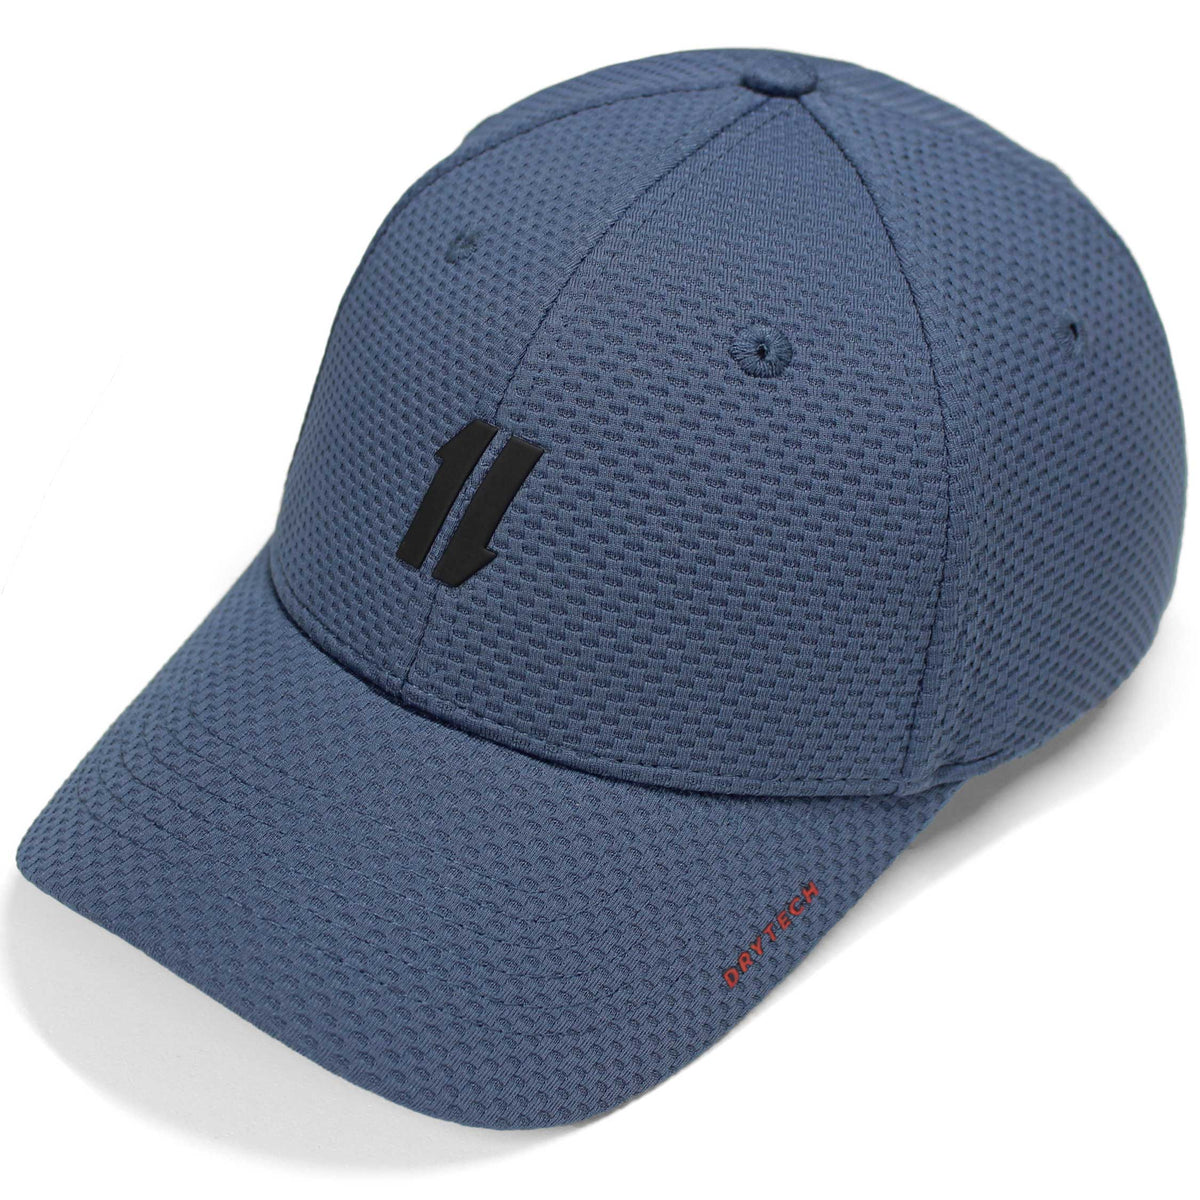 Mens Workout Hat - The Last Rep - Shop Athletic Hat, Gym Hat for Men - King  and Fifth Supply Co.